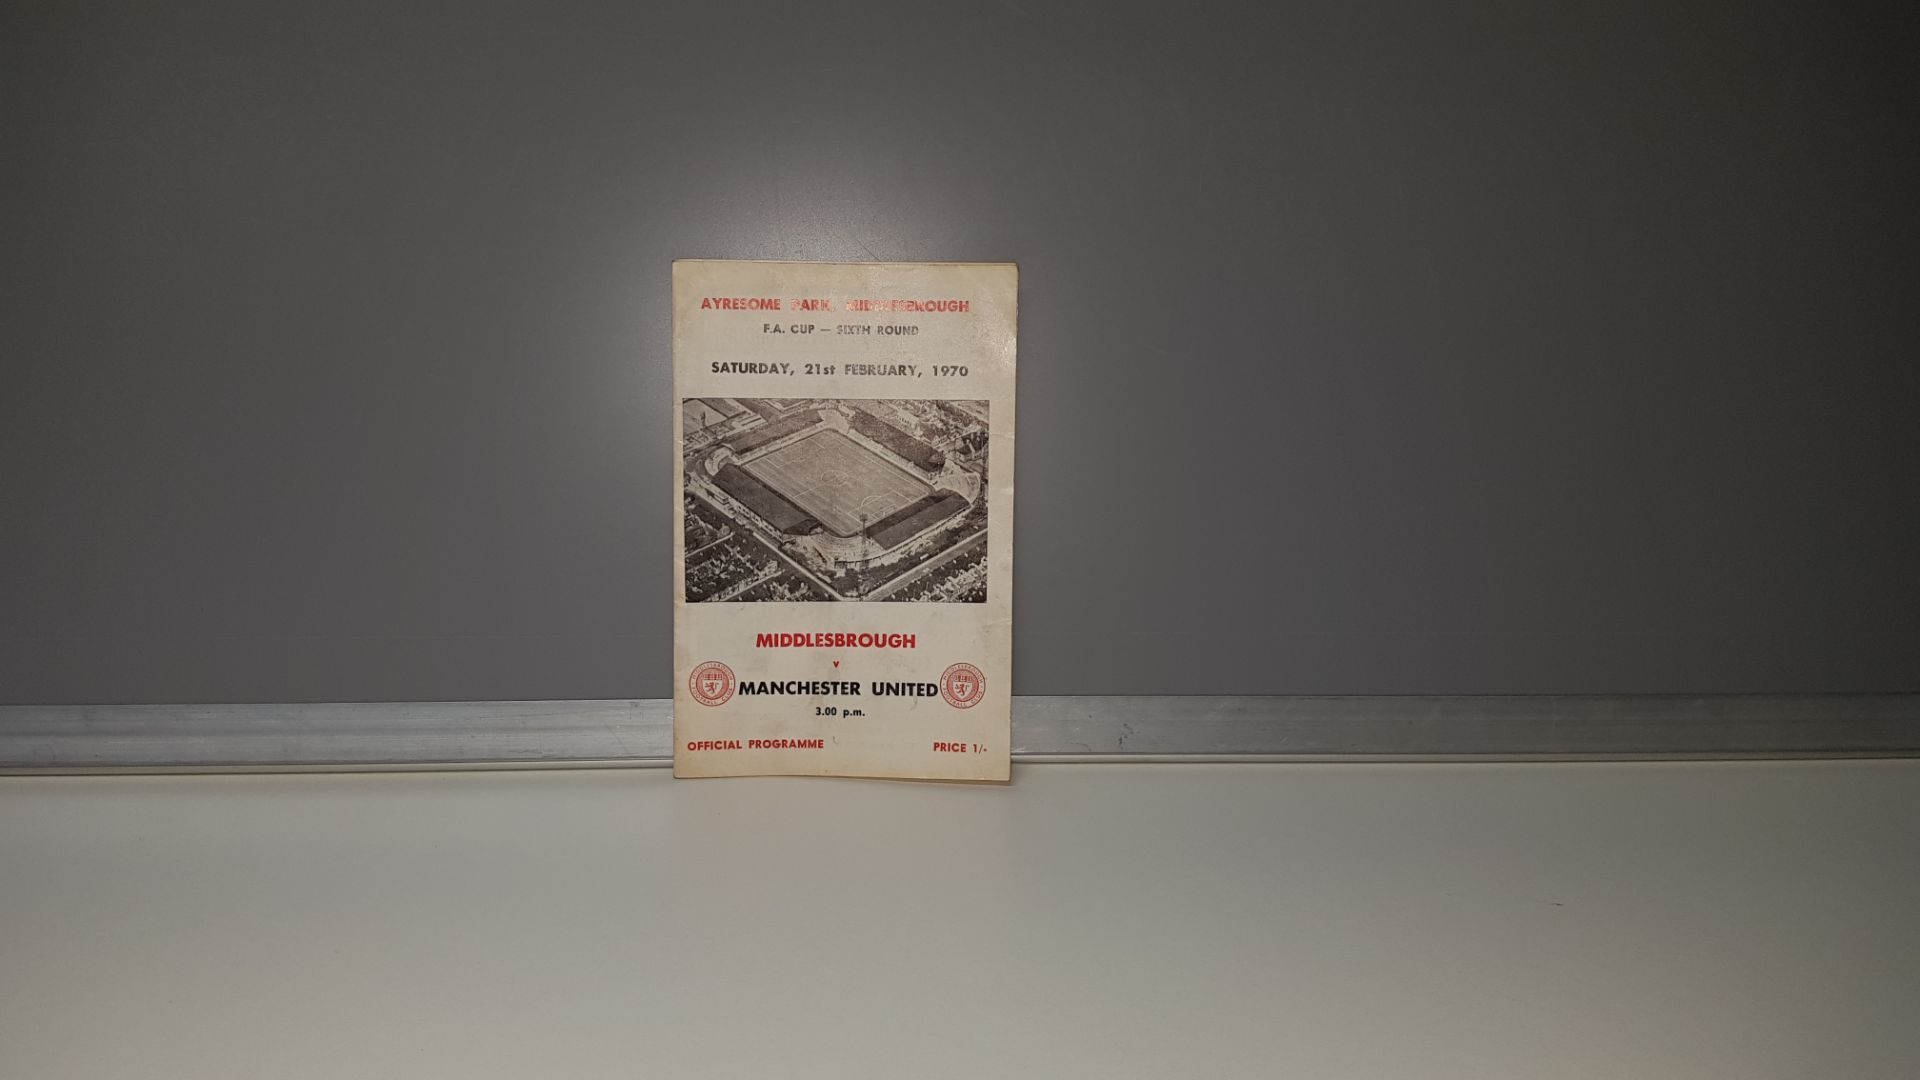 1 X MANCHESTER UNITED AWAY PROGRAMME FROM THE 1970 SEASON TO INCLUDE - MANCHESTER UNITED VS